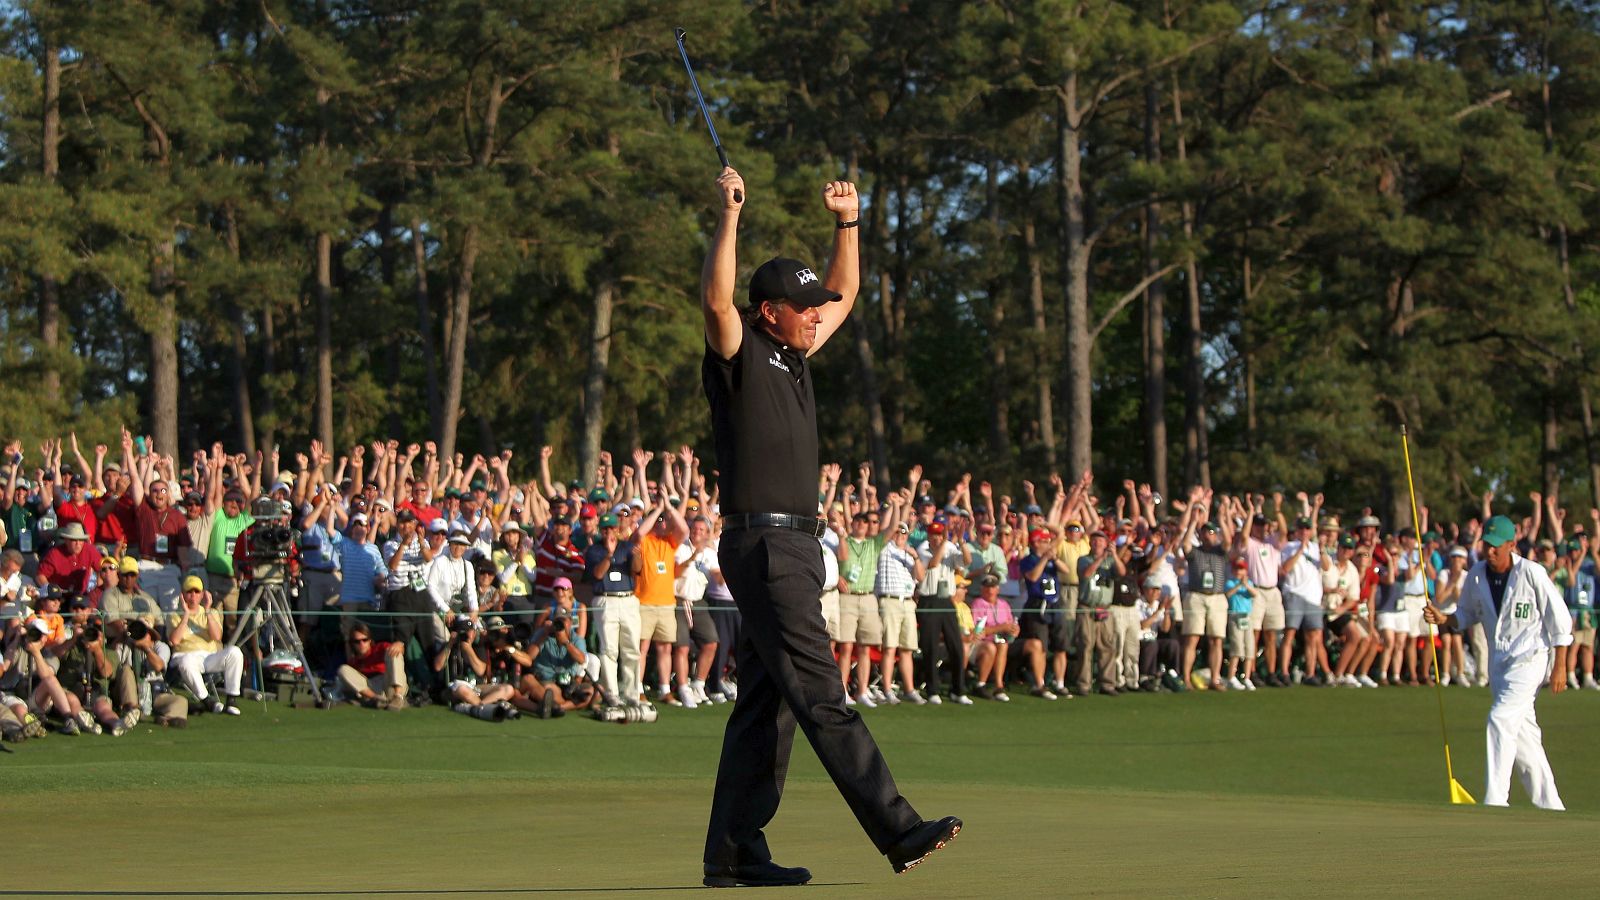 Masters 2010 champion: Phil Mickelson / USA © Andrew Redington / Getty Images